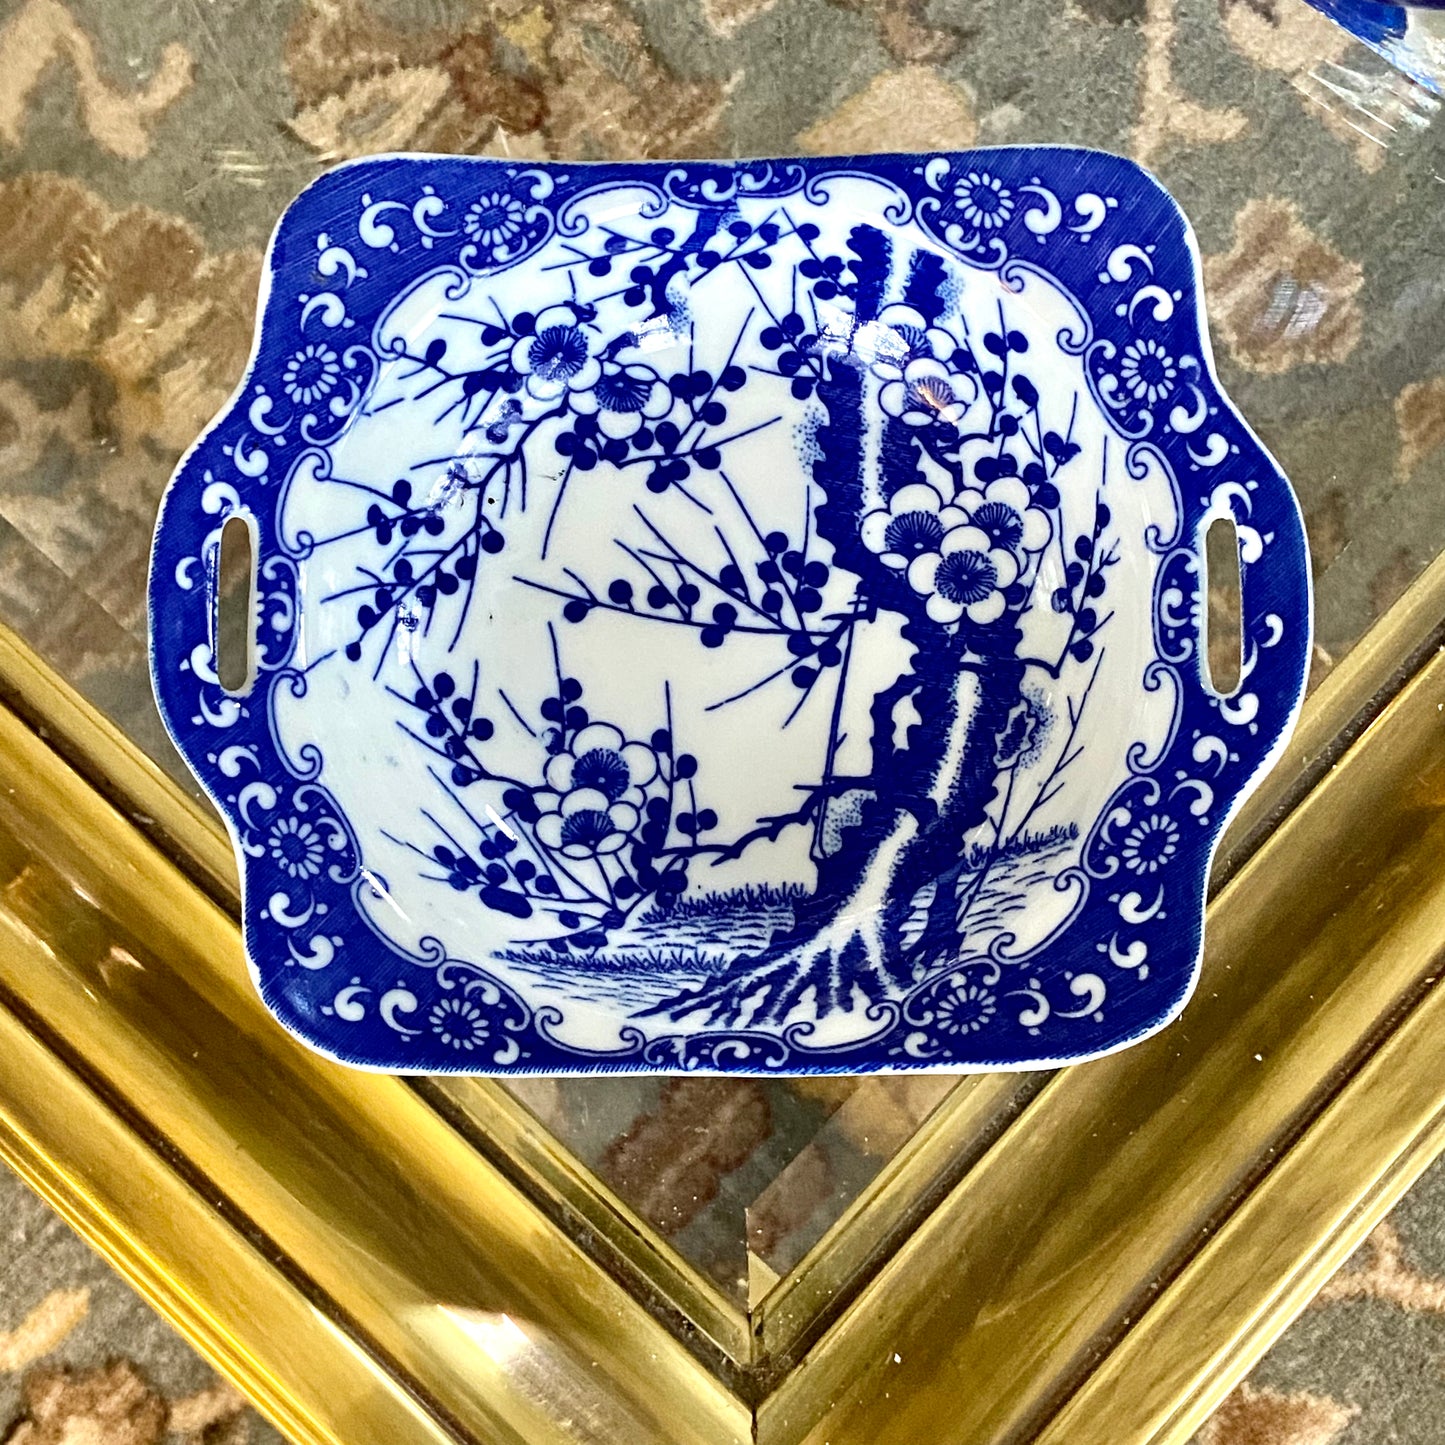 Beautiful cobalt blue and white porcelain cherry blossom double handle dish